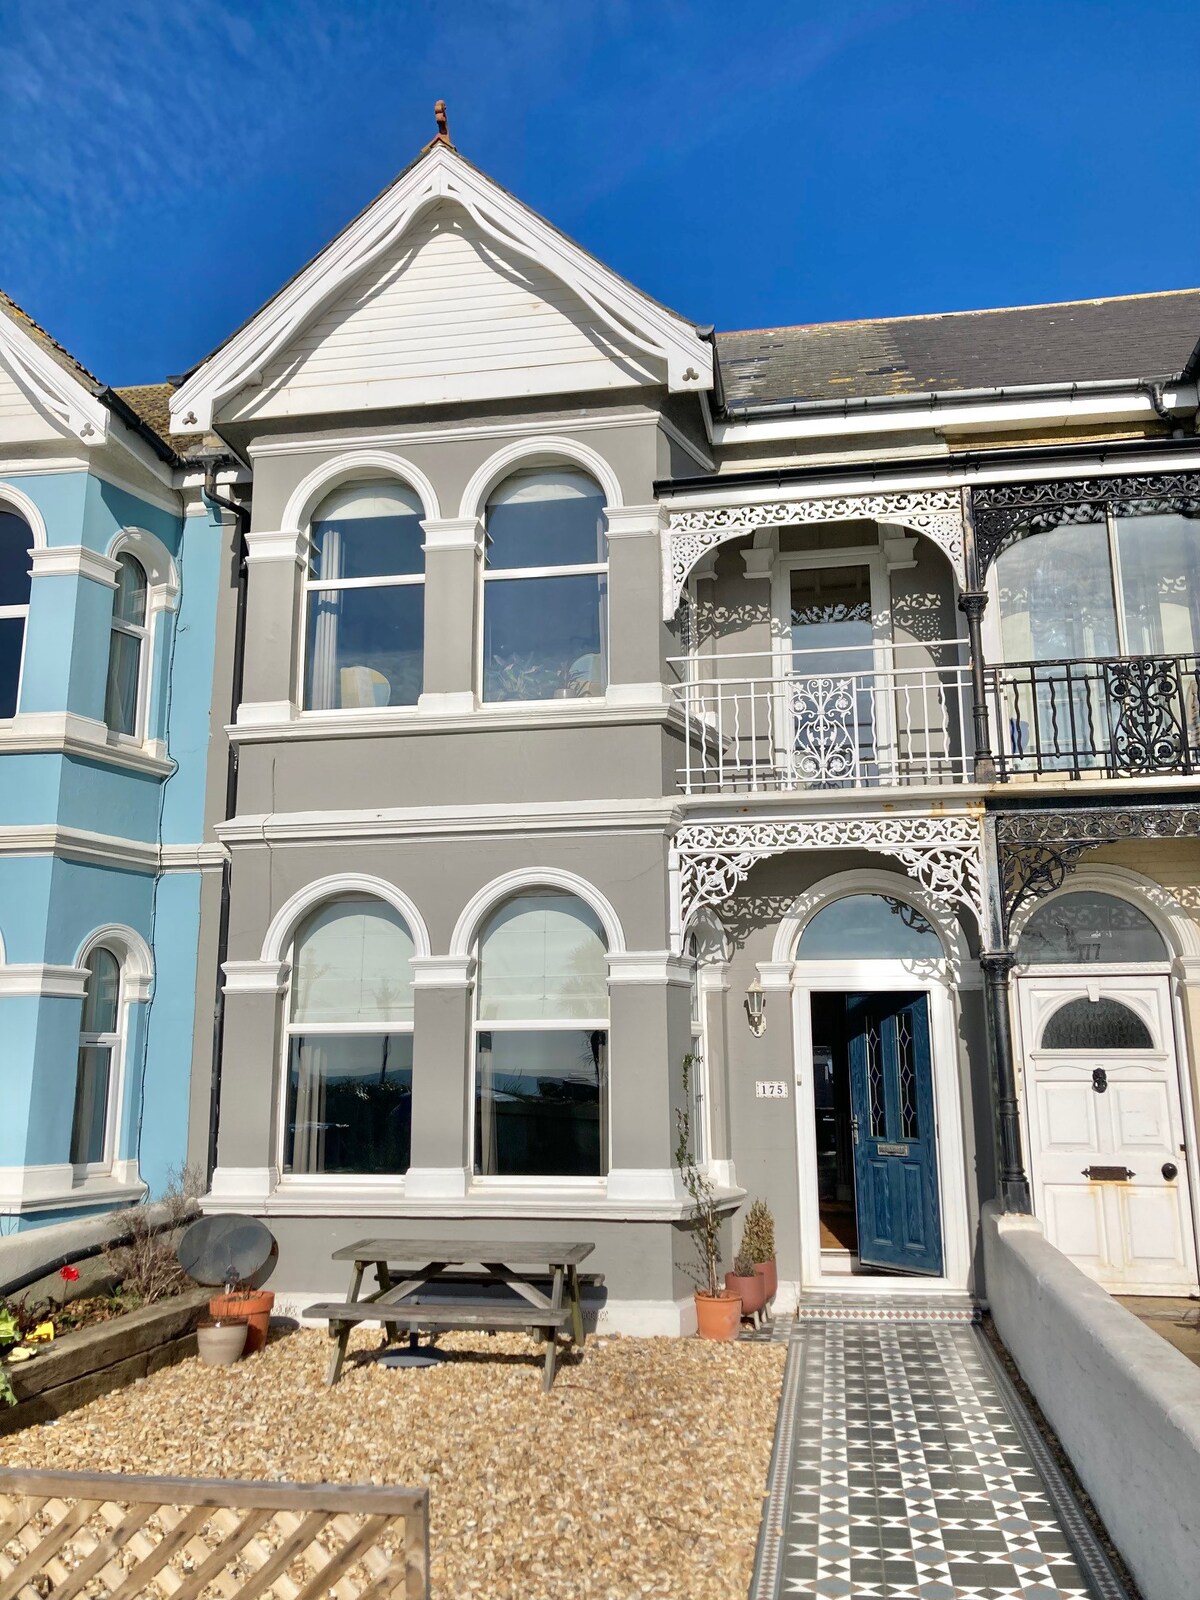 3 bed, Victorian house right on Worthing seafront